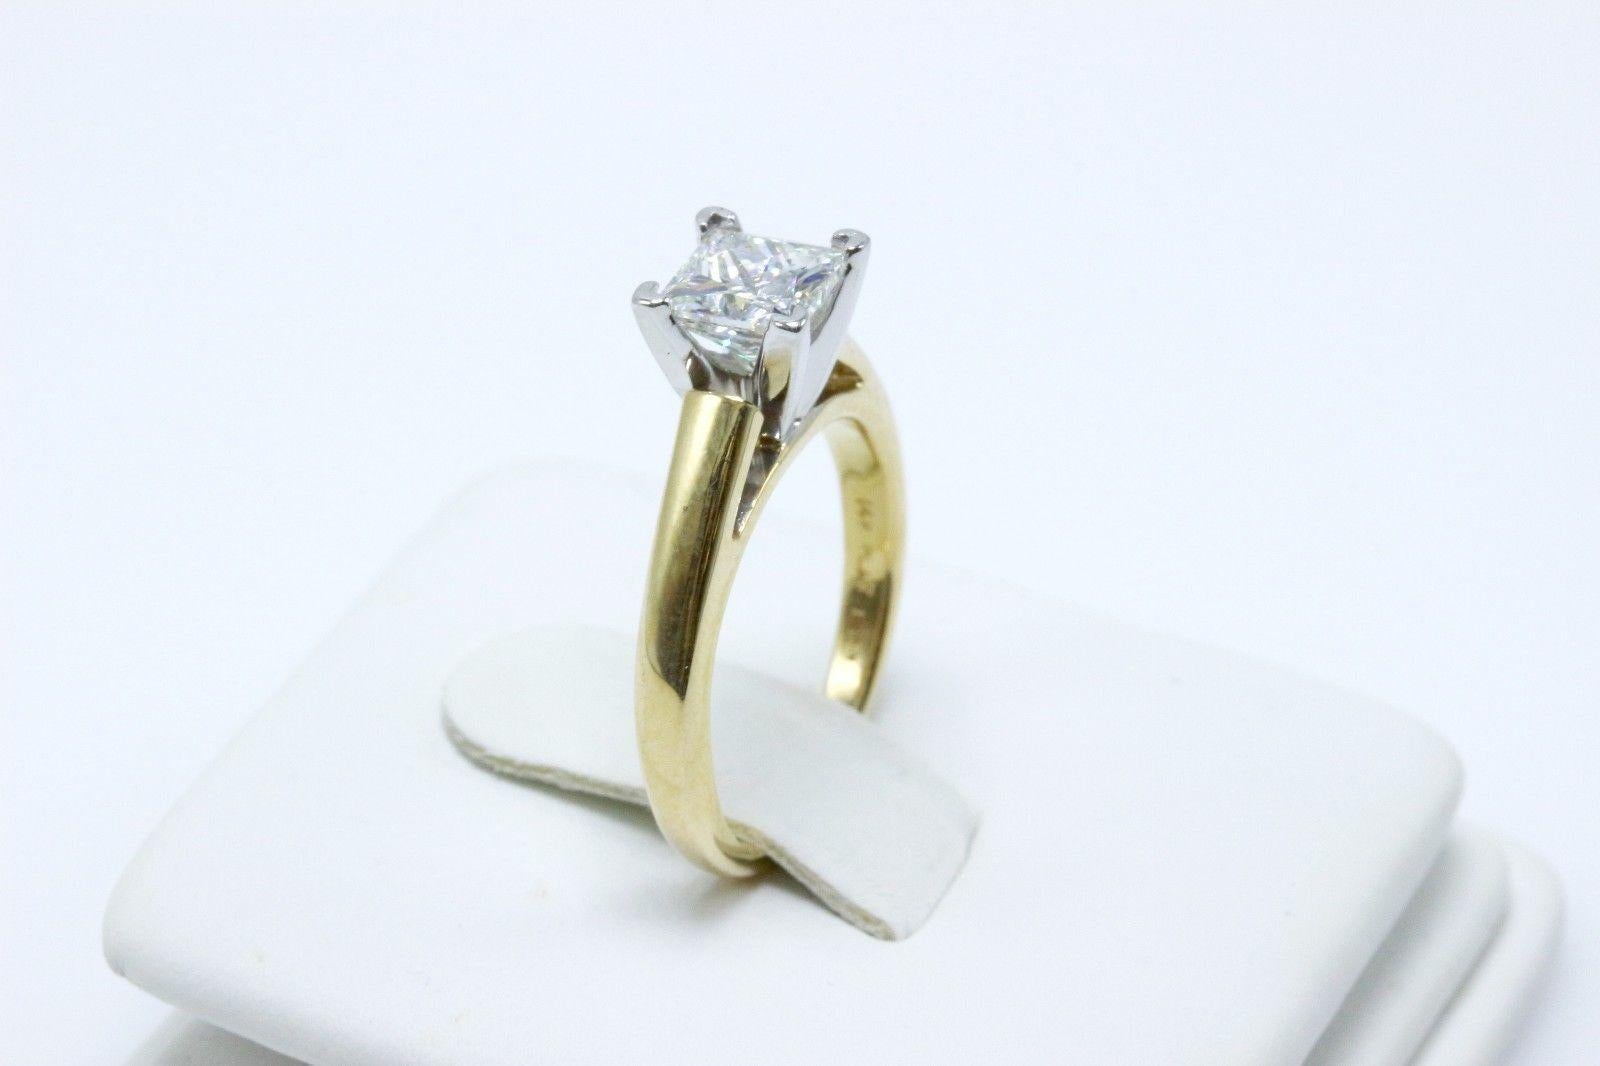 Leo Diamond Engagement Ring Princess Cut 0.97 Carat 14 Karat Yellow Gold In Excellent Condition For Sale In San Diego, CA